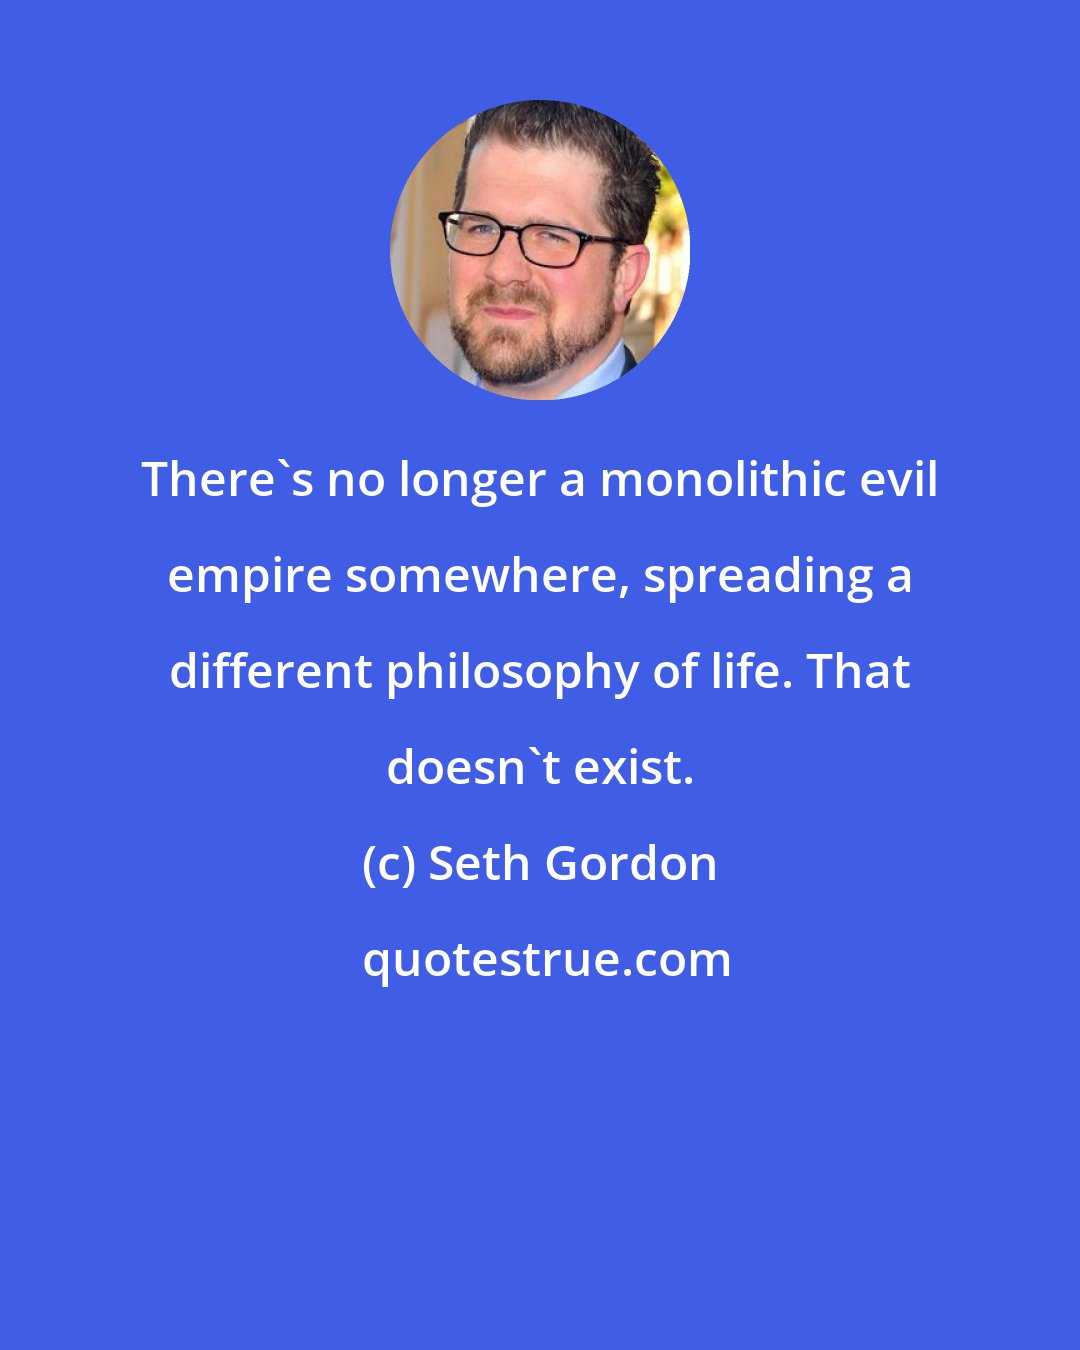 Seth Gordon: There's no longer a monolithic evil empire somewhere, spreading a different philosophy of life. That doesn't exist.